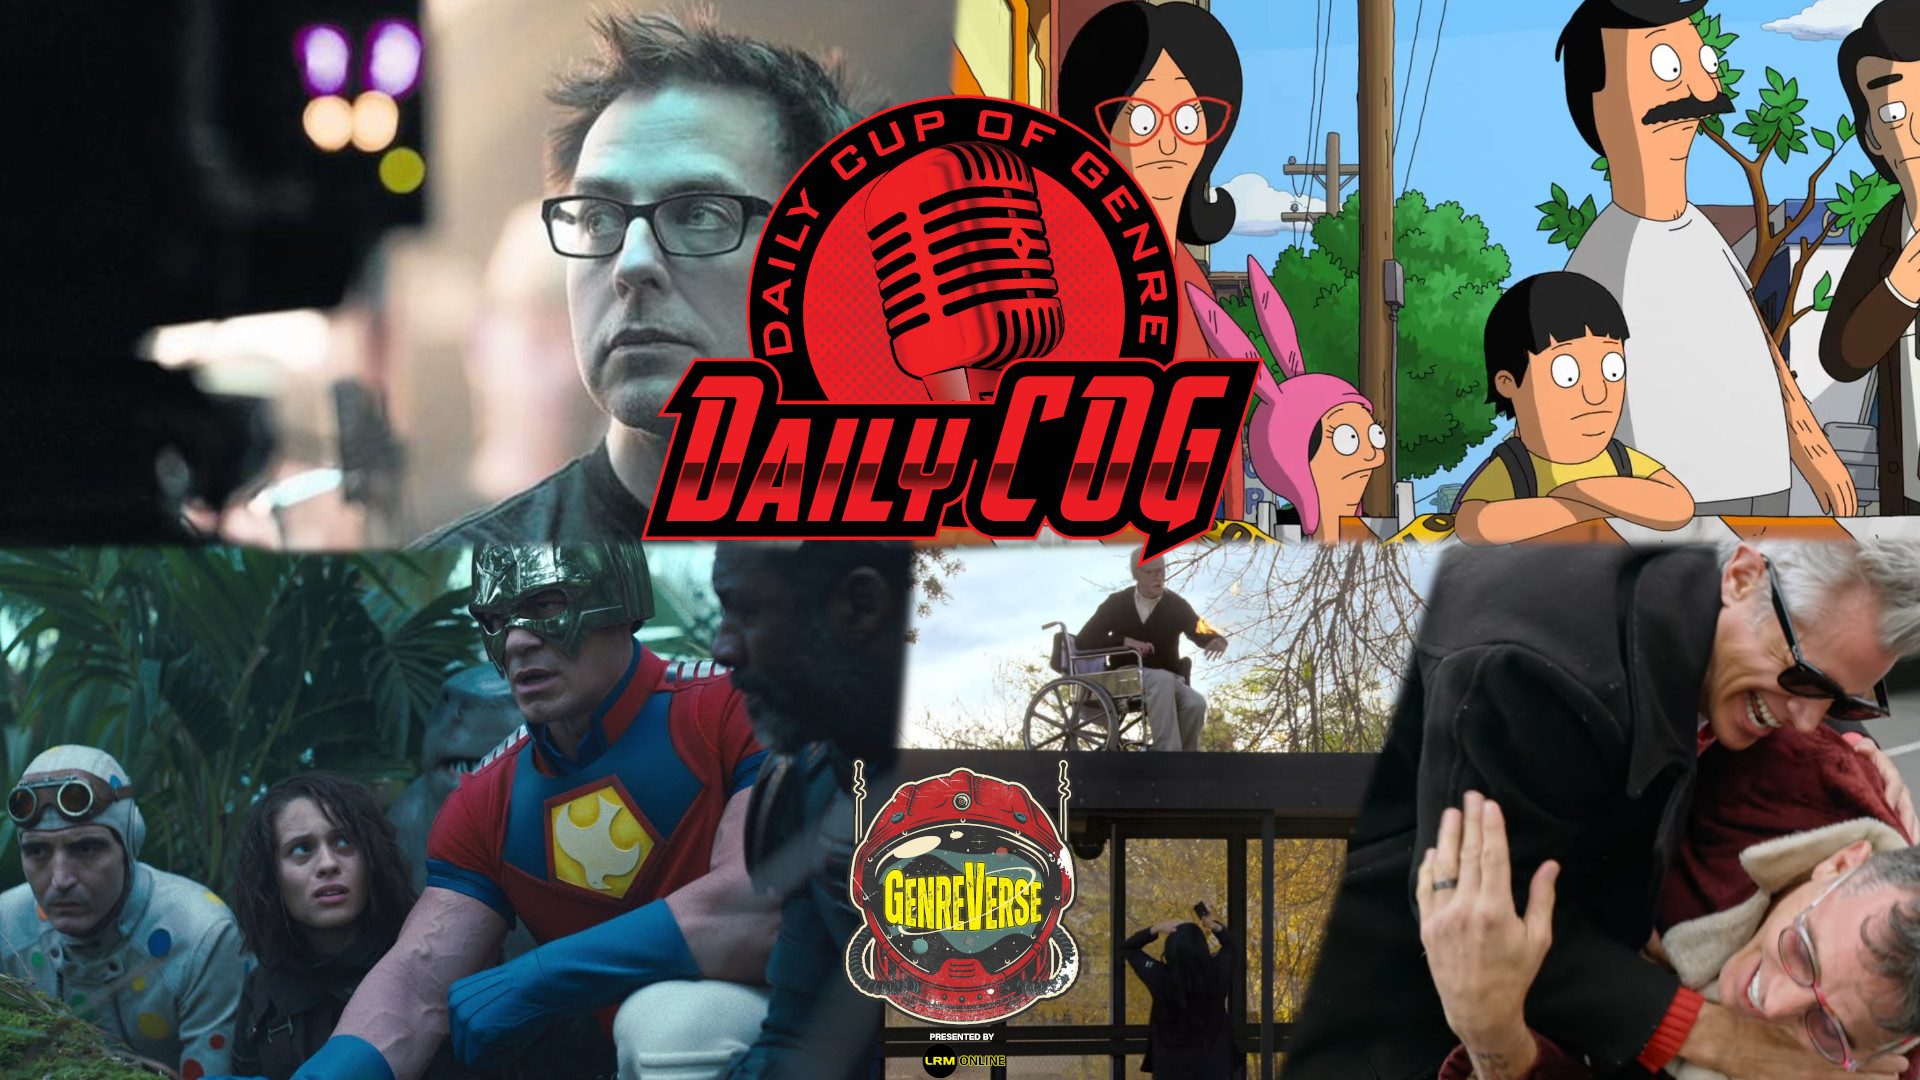 Bobs Burgers The Movie Trailer Reaction, Jackass forever trailer reaction, james gunn DC tv project, mcu getting bland Daily COG Video